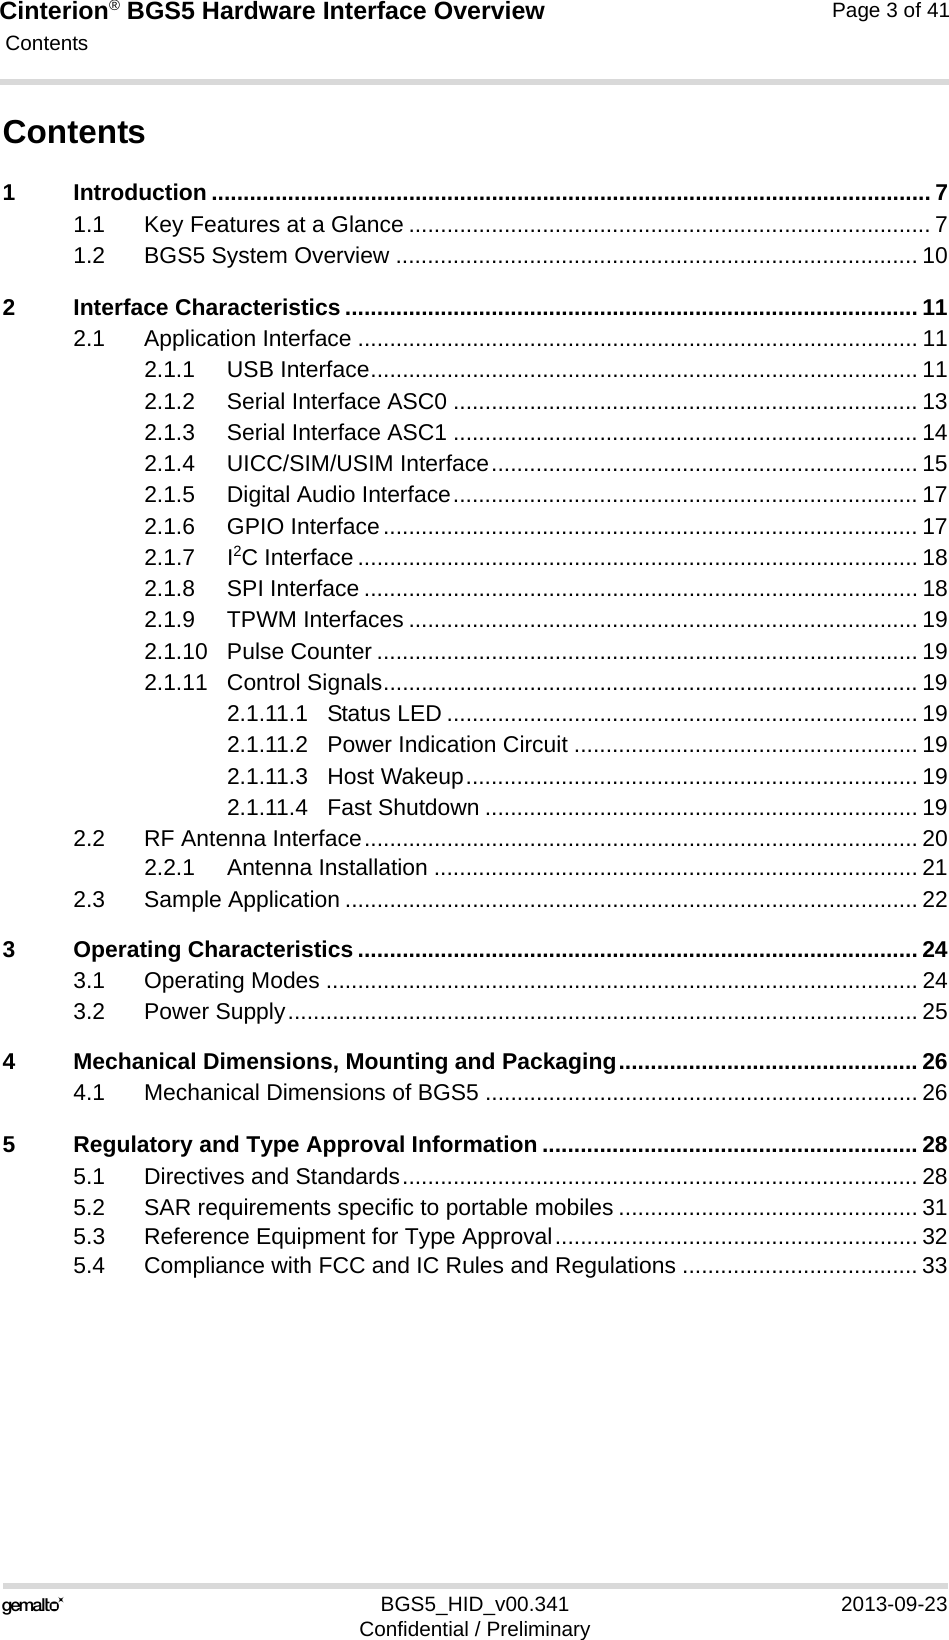 Cinterion® BGS5 Hardware Interface Overview Contents41BGS5_HID_v00.341 2013-09-23Confidential / PreliminaryPage 3 of 41Contents1 Introduction ................................................................................................................. 71.1 Key Features at a Glance .................................................................................. 71.2 BGS5 System Overview .................................................................................. 102 Interface Characteristics .......................................................................................... 112.1 Application Interface ........................................................................................ 112.1.1 USB Interface...................................................................................... 112.1.2 Serial Interface ASC0 ......................................................................... 132.1.3 Serial Interface ASC1 ......................................................................... 142.1.4 UICC/SIM/USIM Interface................................................................... 152.1.5 Digital Audio Interface......................................................................... 172.1.6 GPIO Interface.................................................................................... 172.1.7 I2C Interface ........................................................................................ 182.1.8 SPI Interface ....................................................................................... 182.1.9 TPWM Interfaces ................................................................................ 192.1.10 Pulse Counter ..................................................................................... 192.1.11 Control Signals.................................................................................... 192.1.11.1 Status LED .......................................................................... 192.1.11.2 Power Indication Circuit ...................................................... 192.1.11.3 Host Wakeup....................................................................... 192.1.11.4 Fast Shutdown .................................................................... 192.2 RF Antenna Interface....................................................................................... 202.2.1 Antenna Installation ............................................................................ 212.3 Sample Application .......................................................................................... 223 Operating Characteristics ........................................................................................ 243.1 Operating Modes ............................................................................................. 243.2 Power Supply................................................................................................... 254 Mechanical Dimensions, Mounting and Packaging............................................... 264.1 Mechanical Dimensions of BGS5 .................................................................... 265 Regulatory and Type Approval Information ........................................................... 285.1 Directives and Standards................................................................................. 285.2 SAR requirements specific to portable mobiles ............................................... 315.3 Reference Equipment for Type Approval......................................................... 325.4 Compliance with FCC and IC Rules and Regulations ..................................... 33